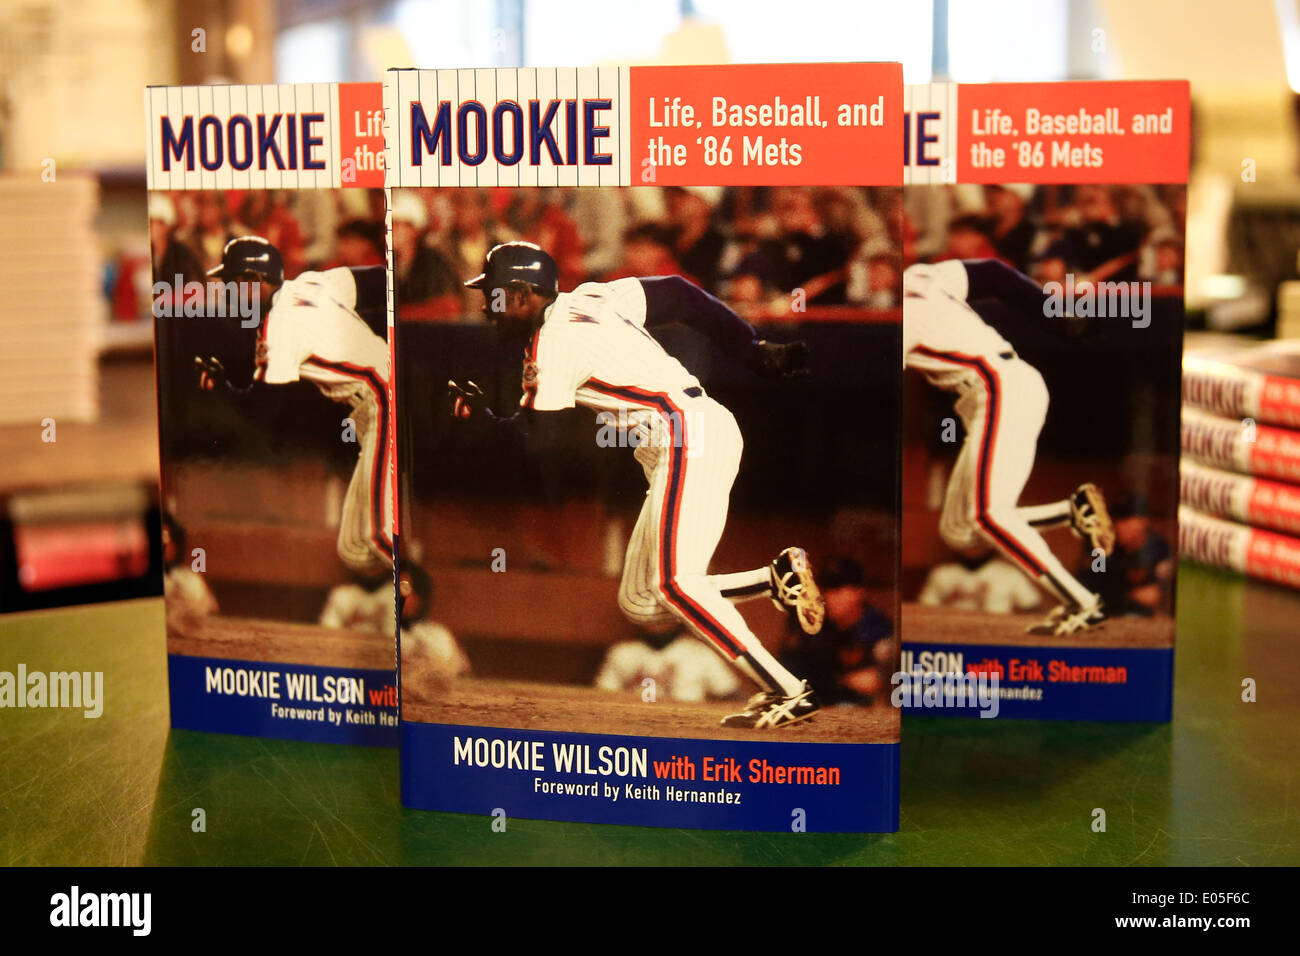  Mookie: Life, Baseball, and the '86 Mets